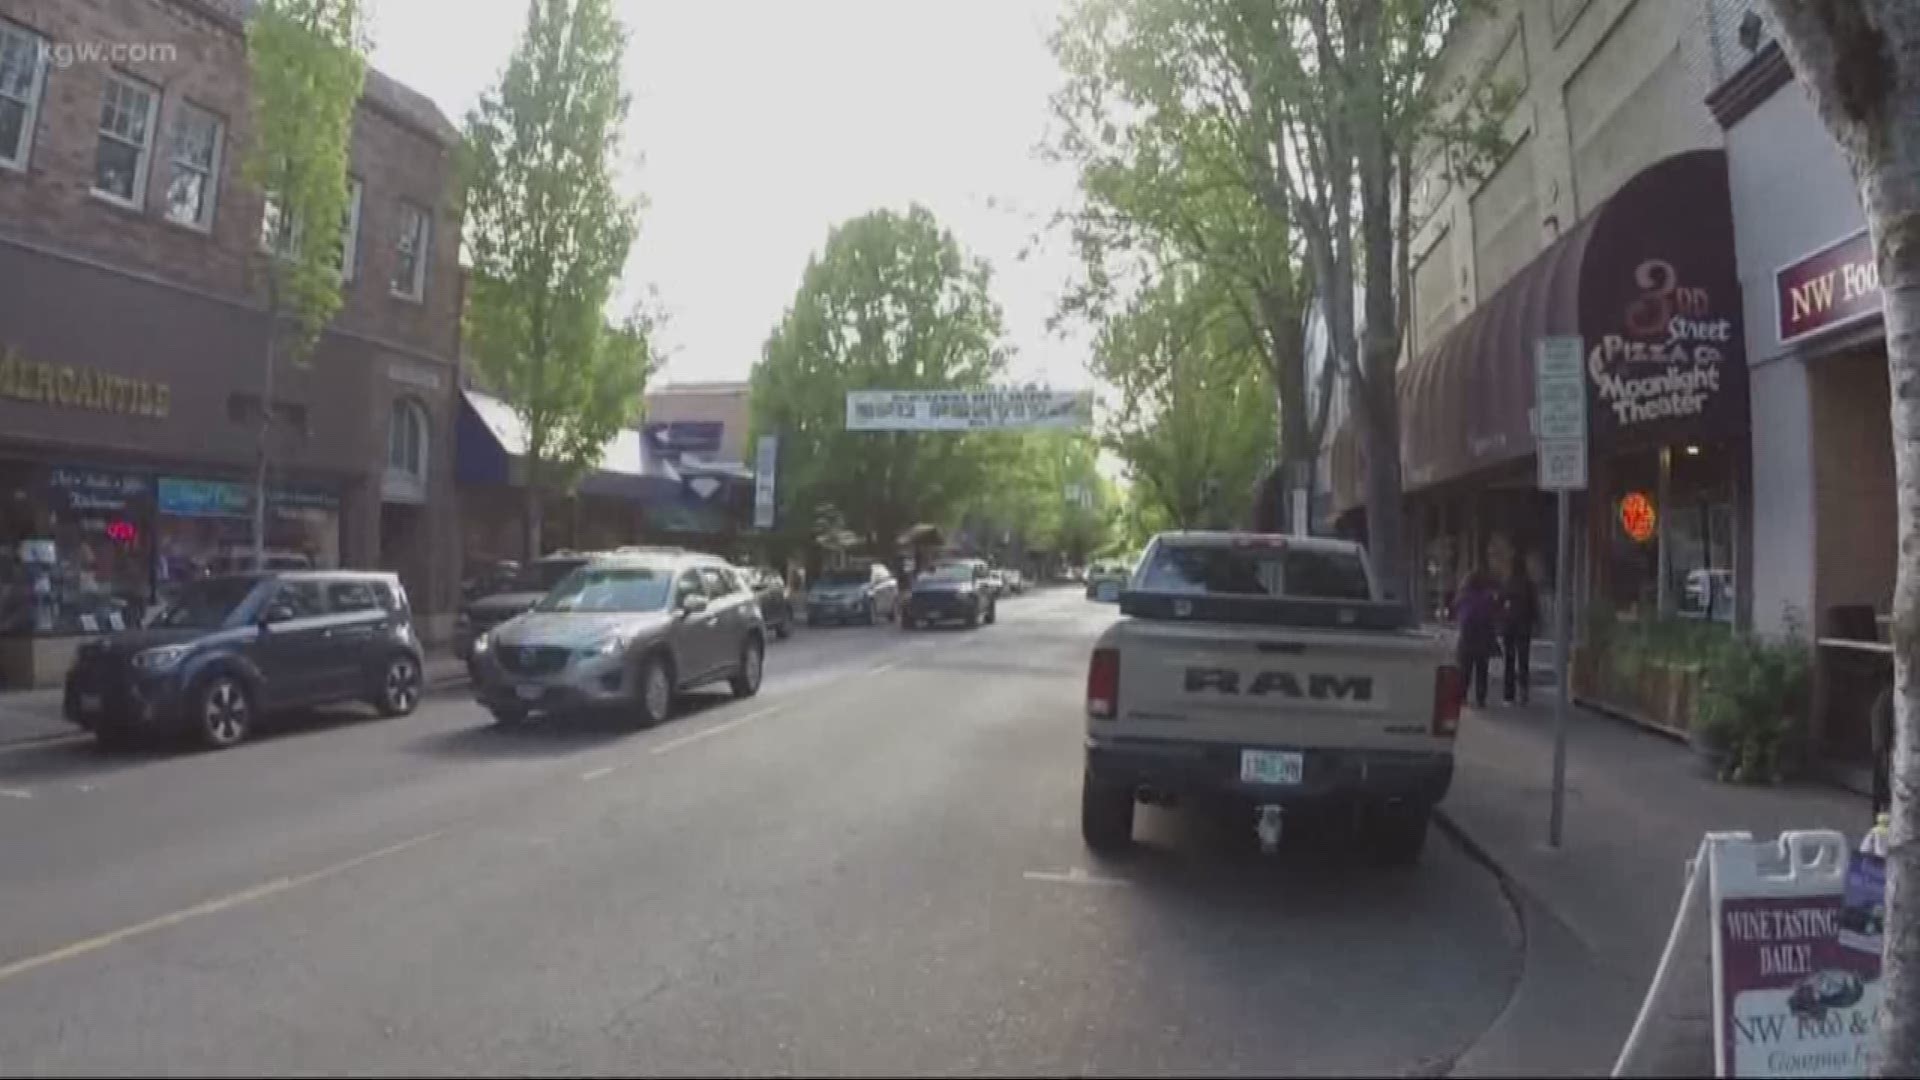 The annual UFO festival in McMinnville is underway.